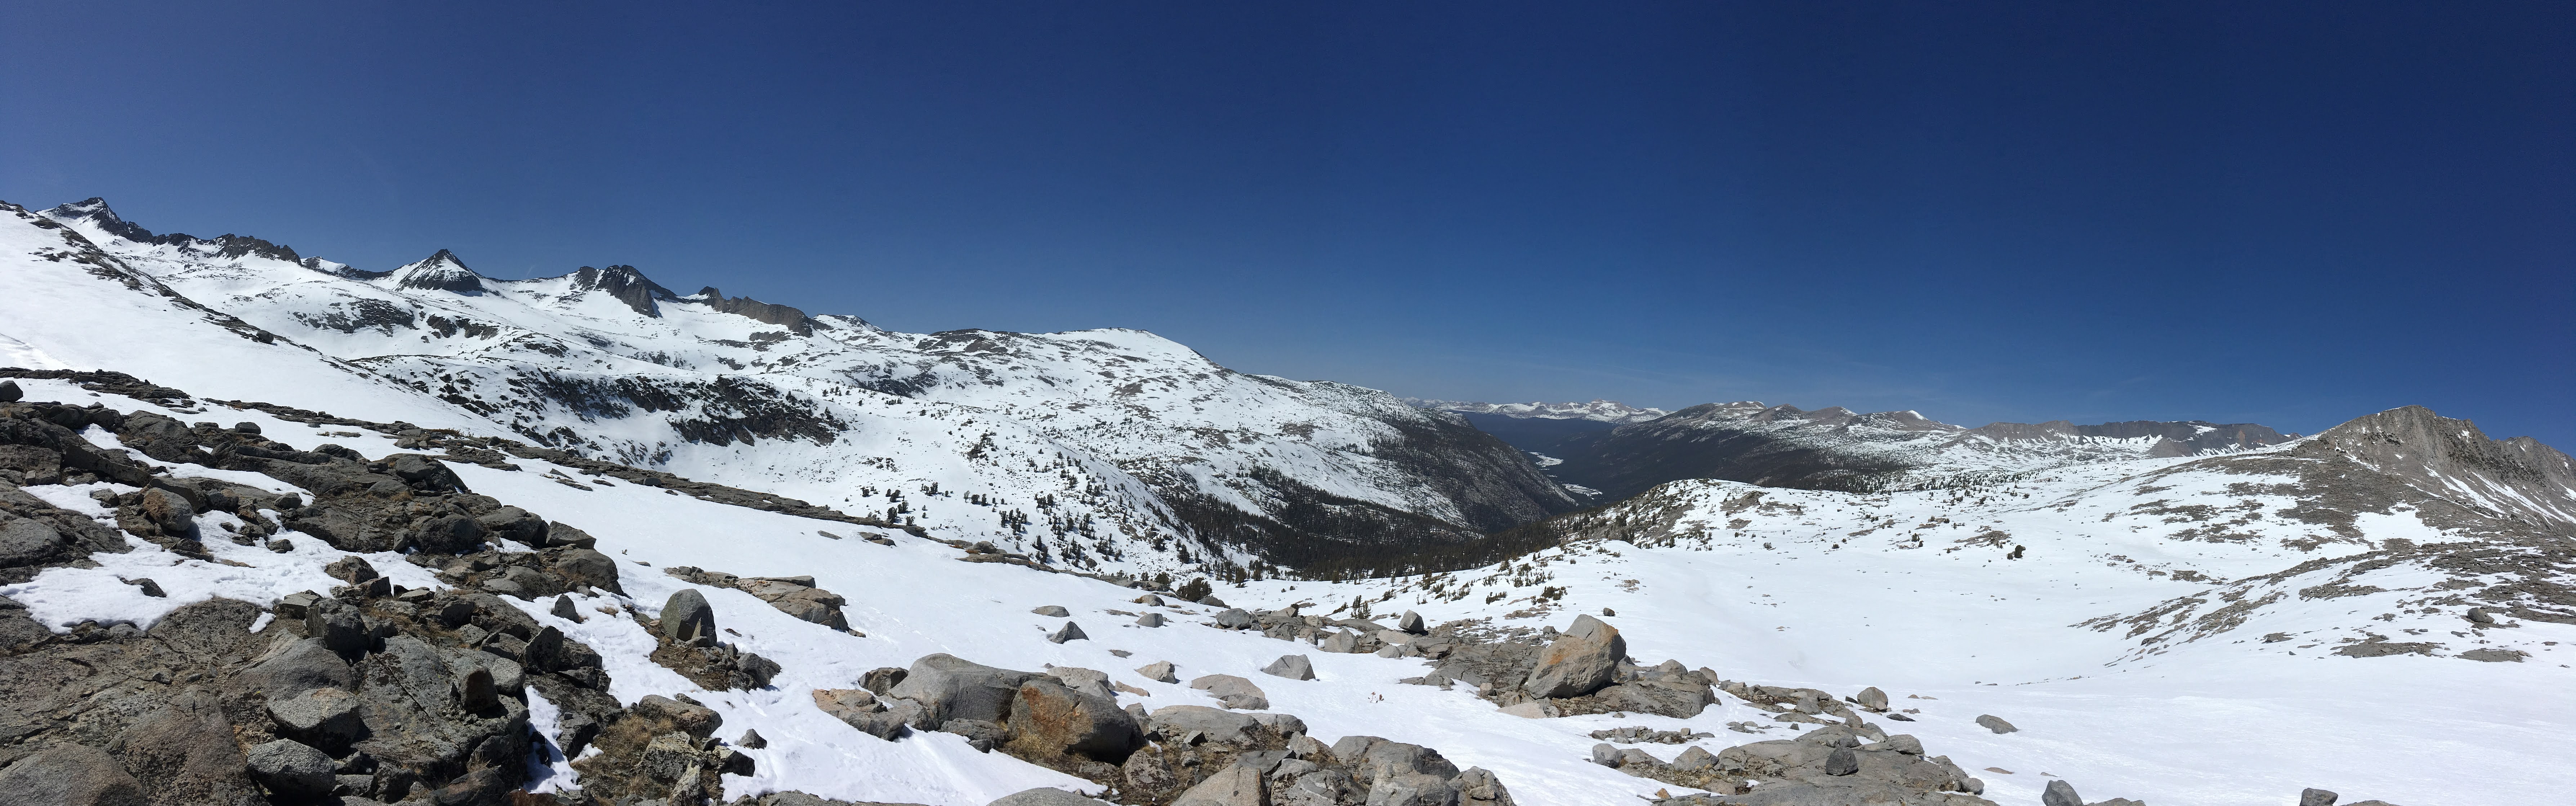 Panorama looking down Lyell Canyon from a summit, with a mostly snow-covered landscape except in the canyon itself